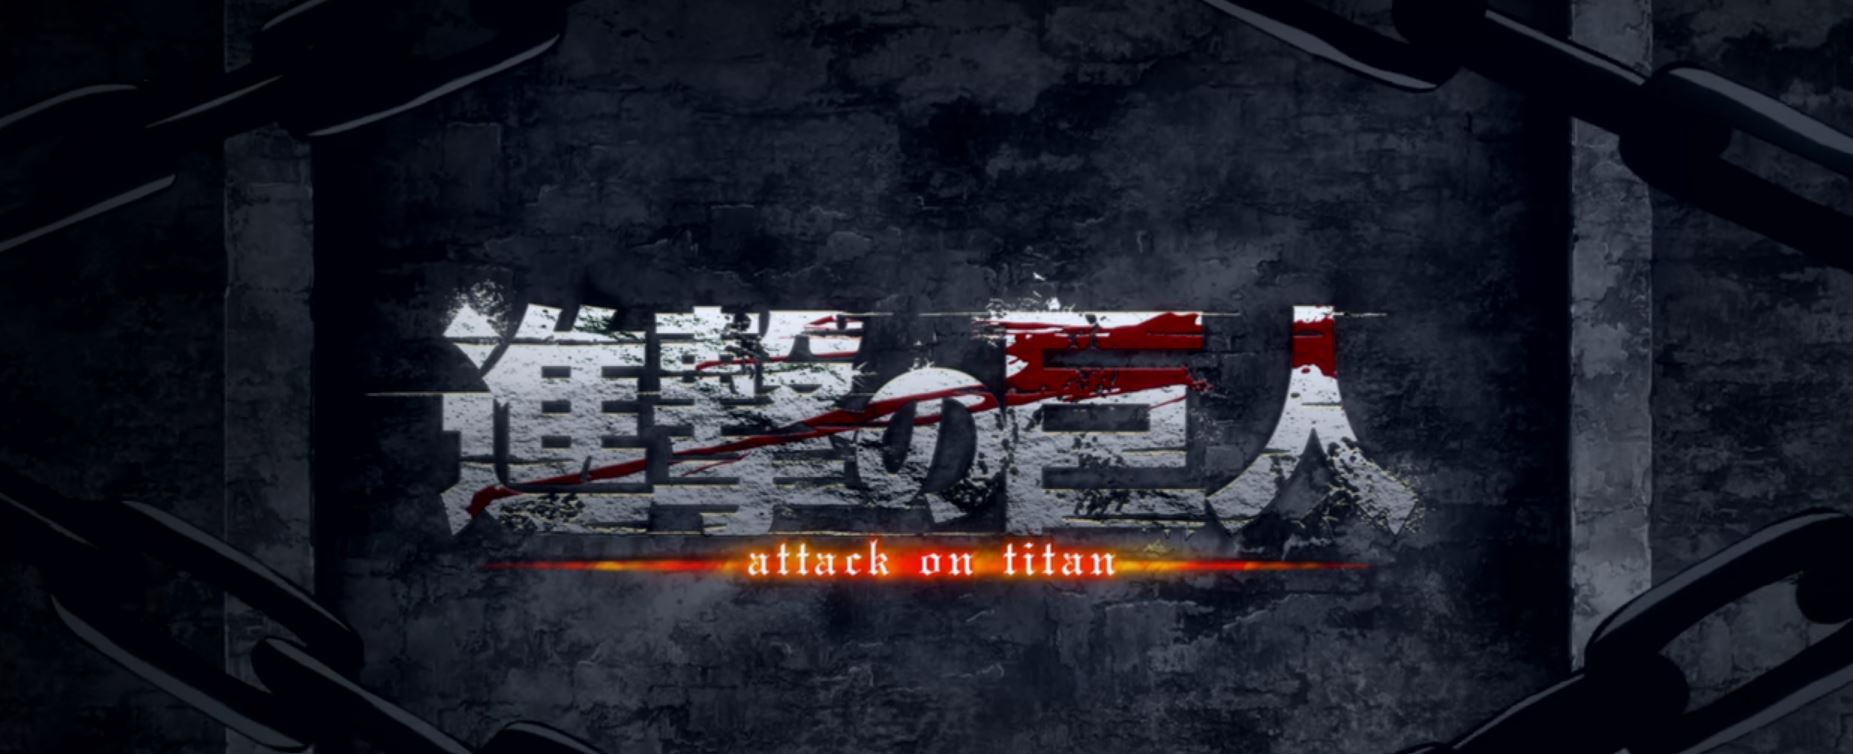 Is 'Attack on Titan' on Netflix? Answered